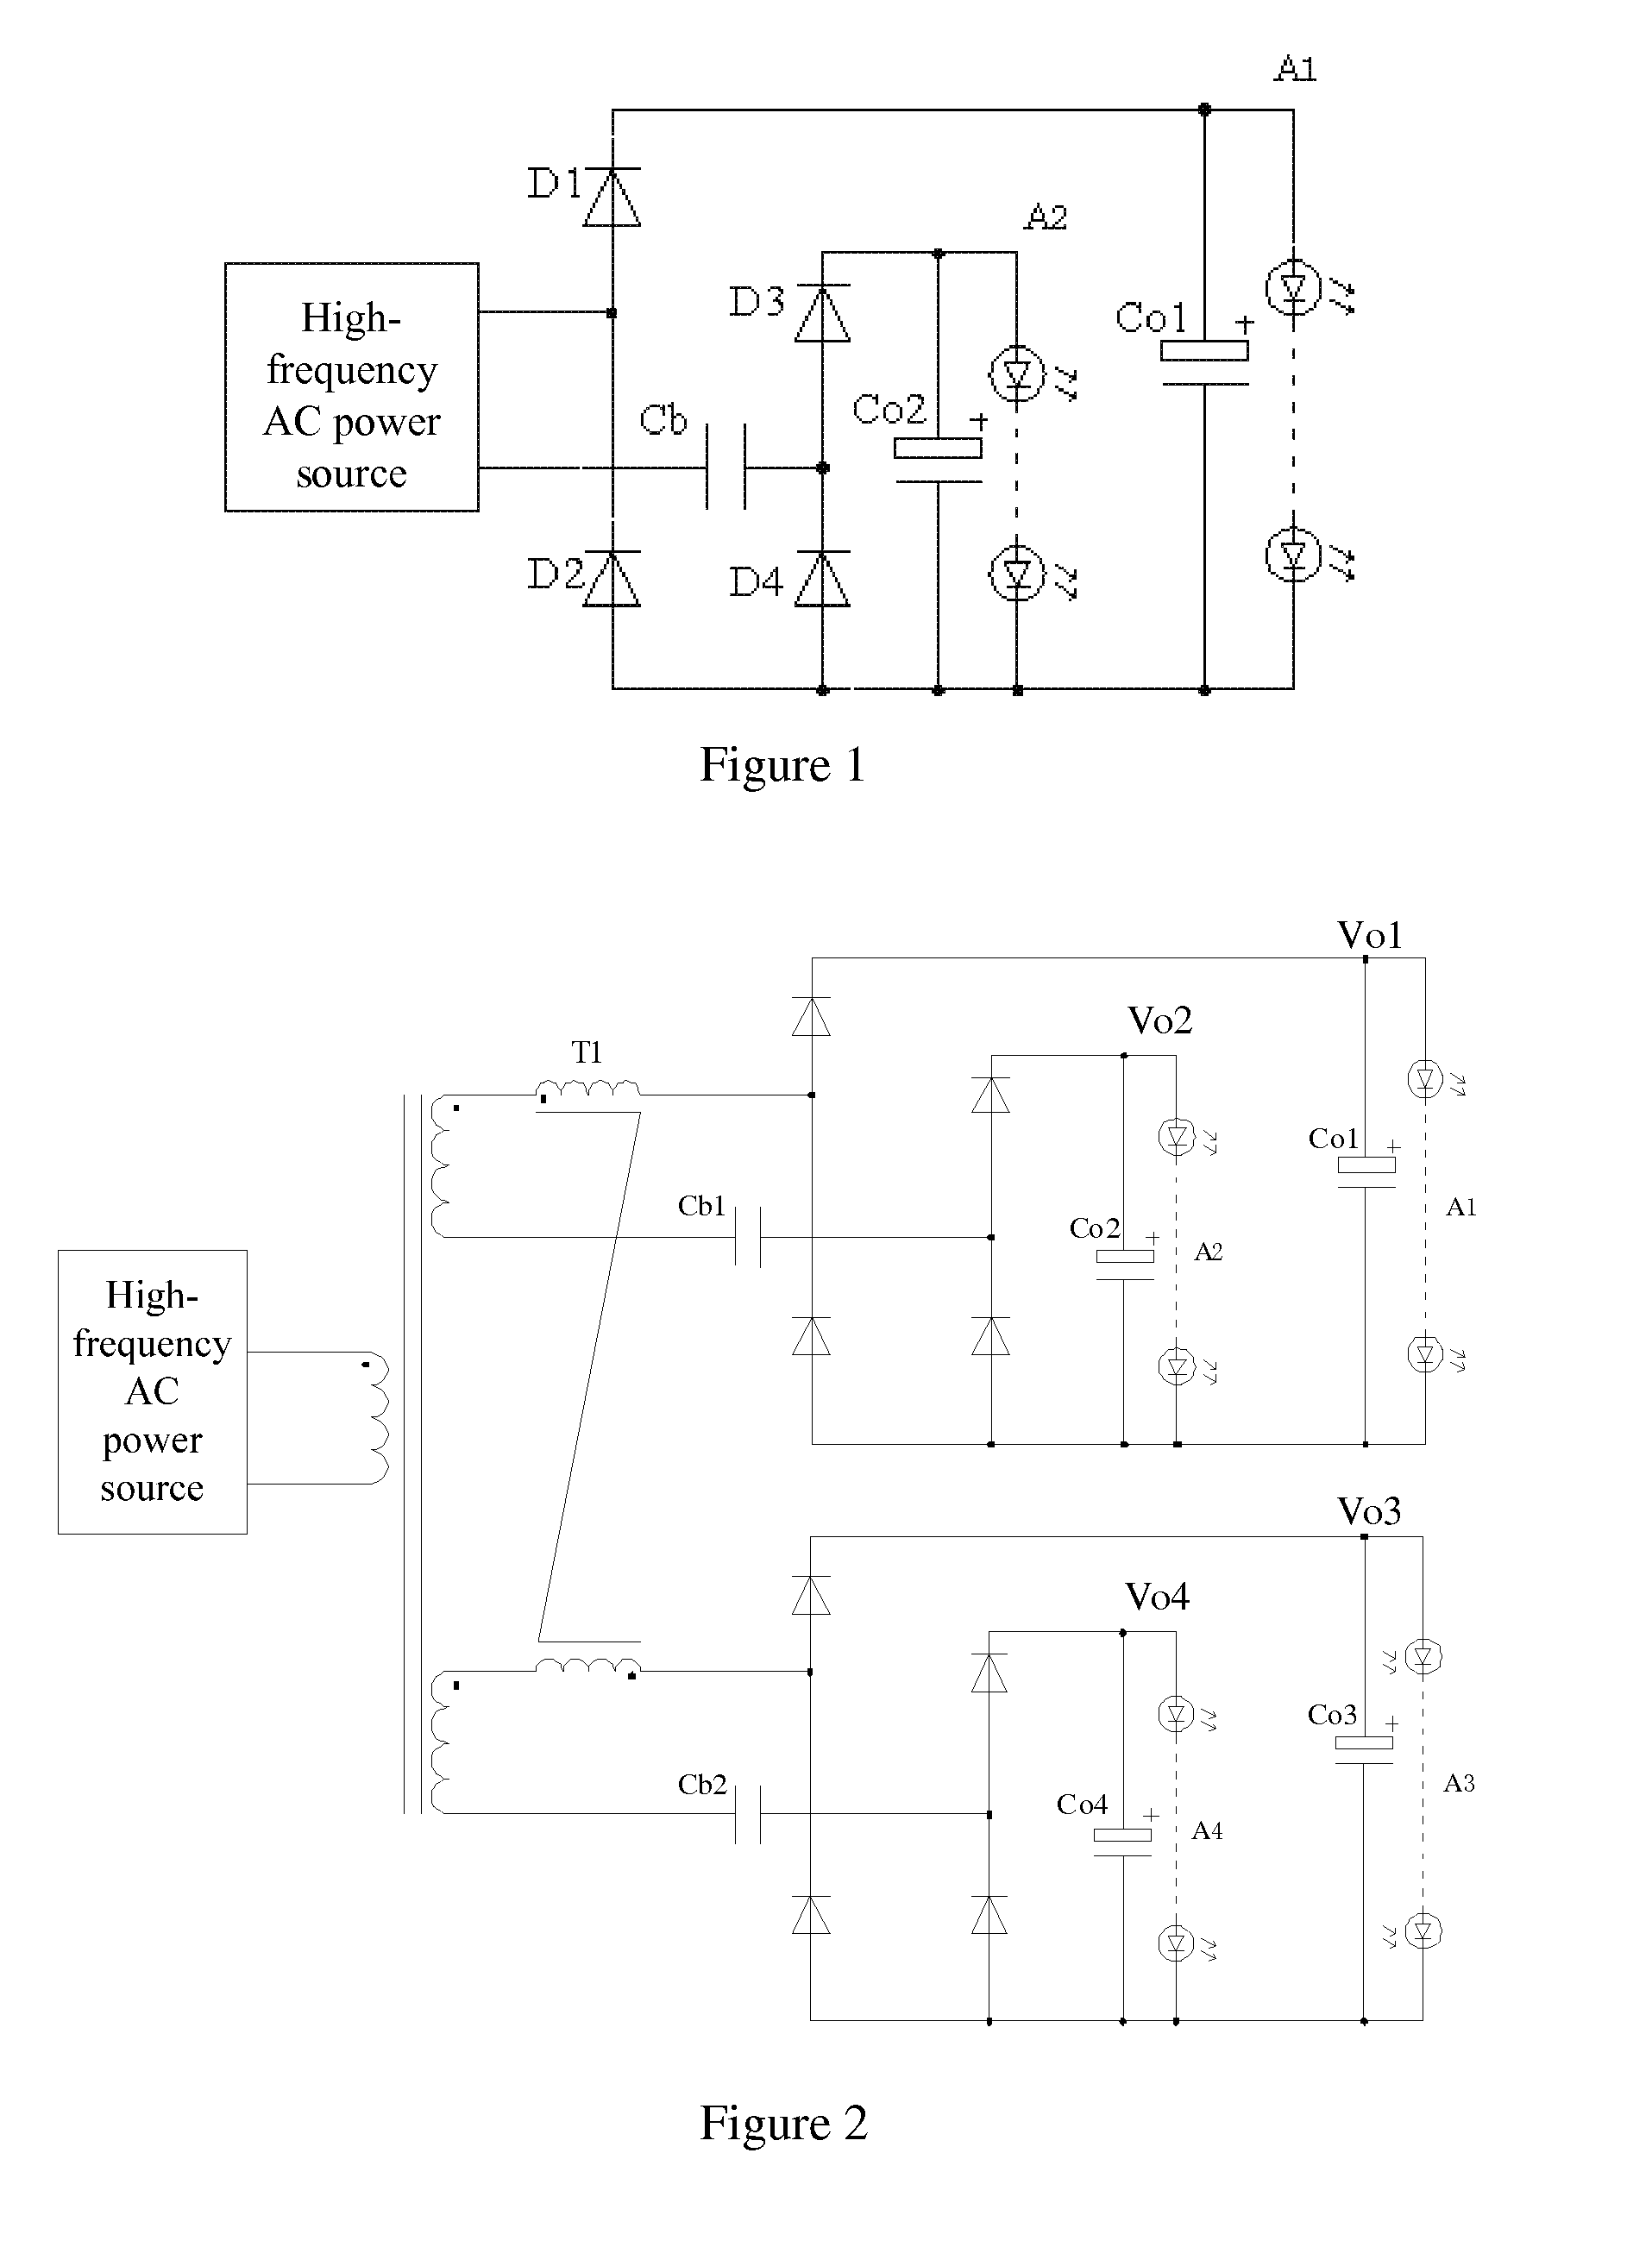 Power supply circuit for multi-path light-emitting diode (LED) loads